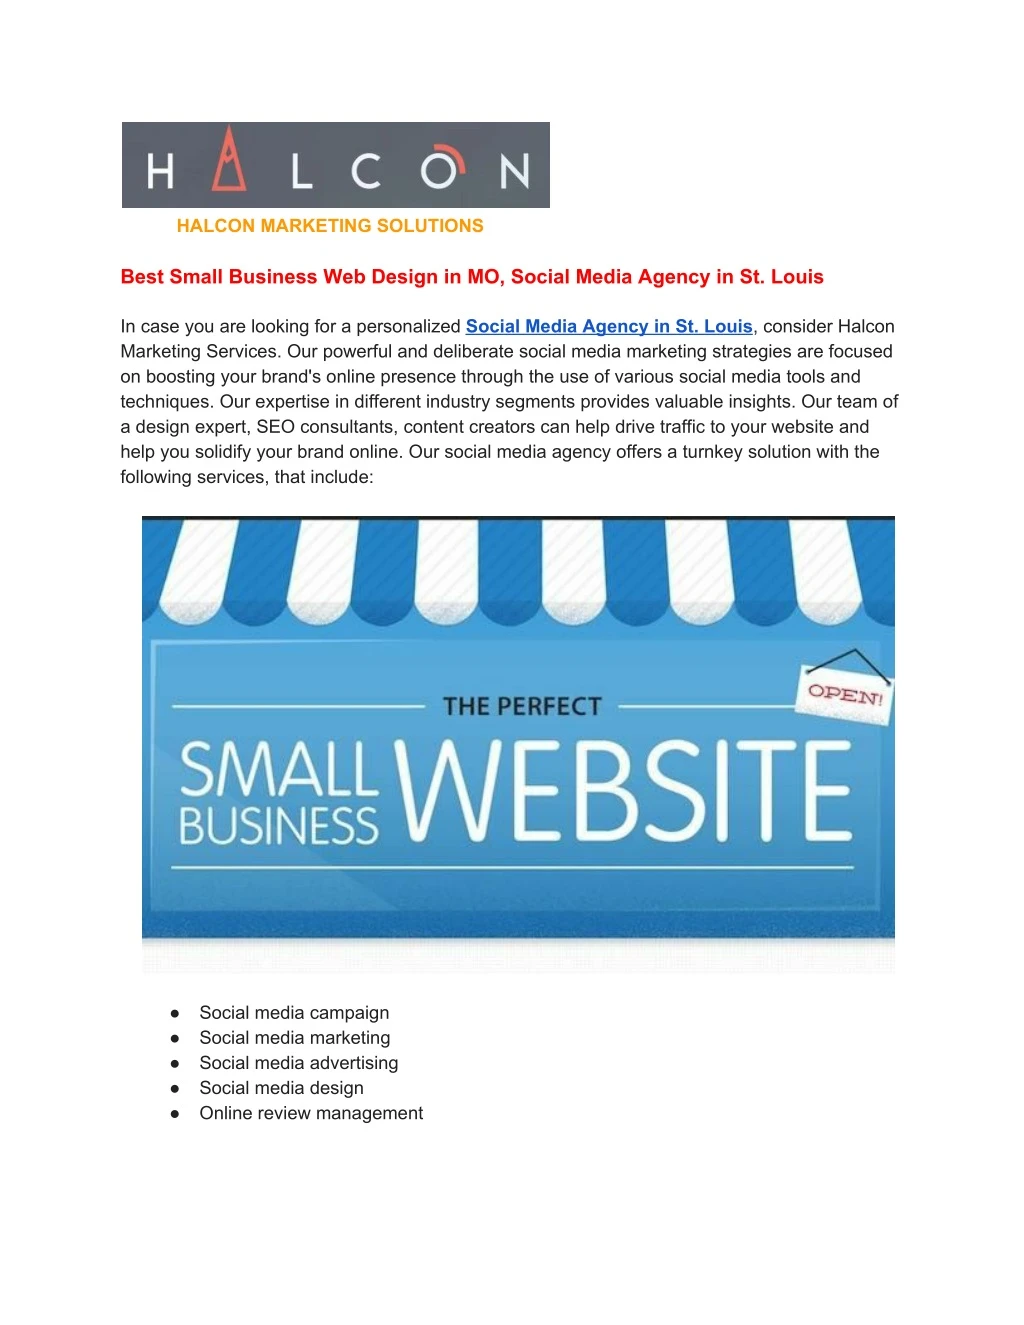 halcon marketing solutions best small business